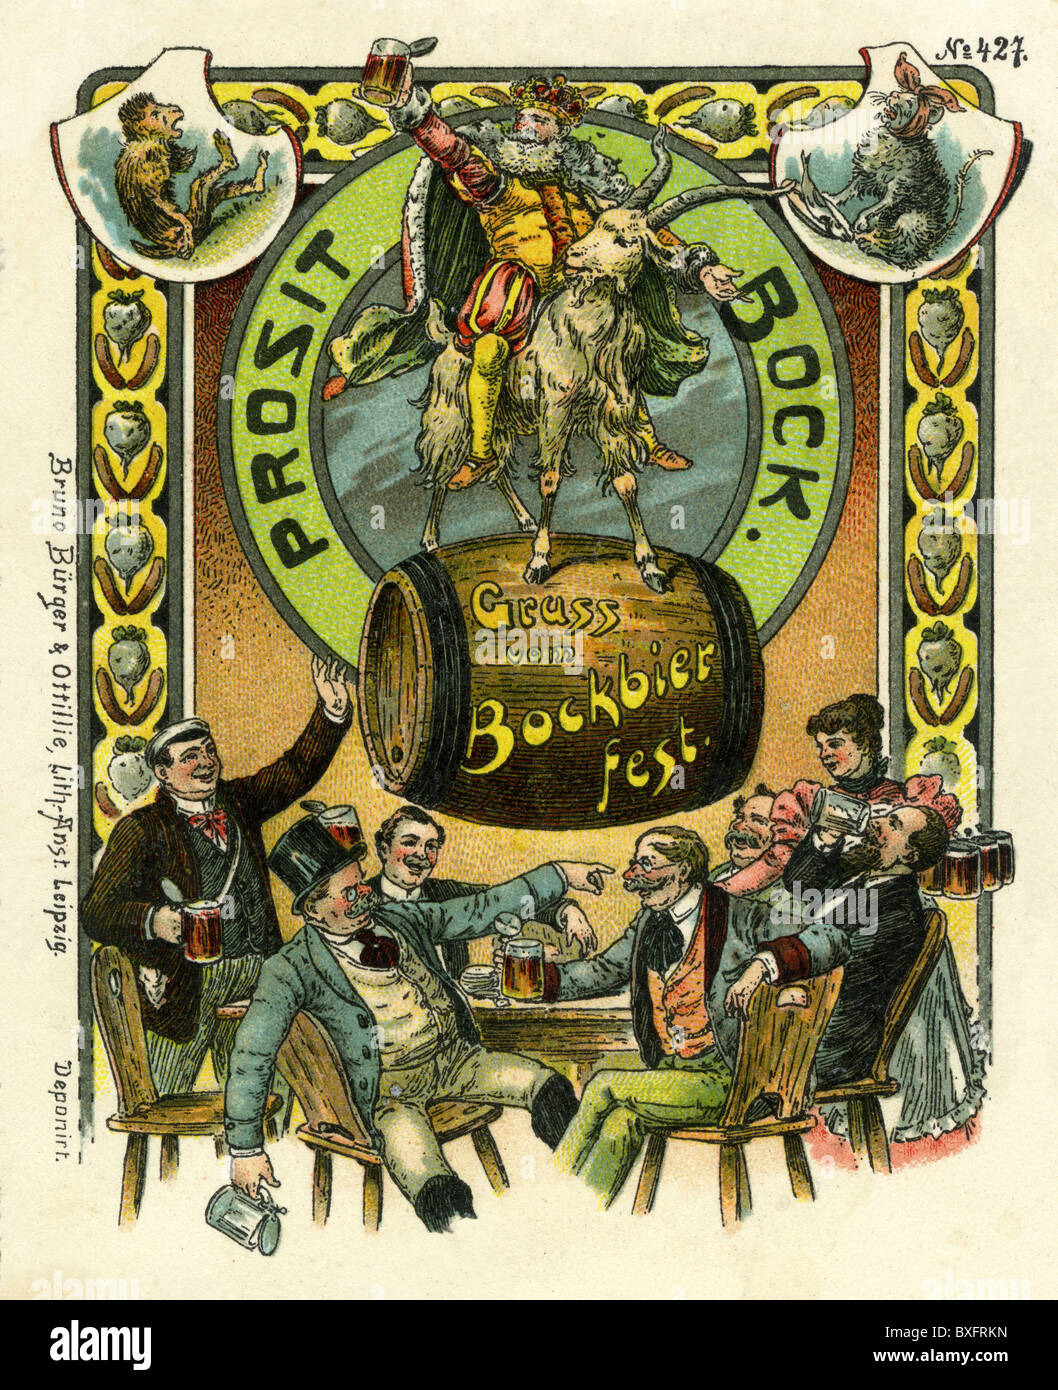 festivals, public festival, greetings from bock beer festival, King Gambrinus, legendary inventor of the beer, patron of brewers, riding on buck, picture postcard, Leipzig, Germany, 1897, Additional-Rights-Clearences-Not Available Stock Photo